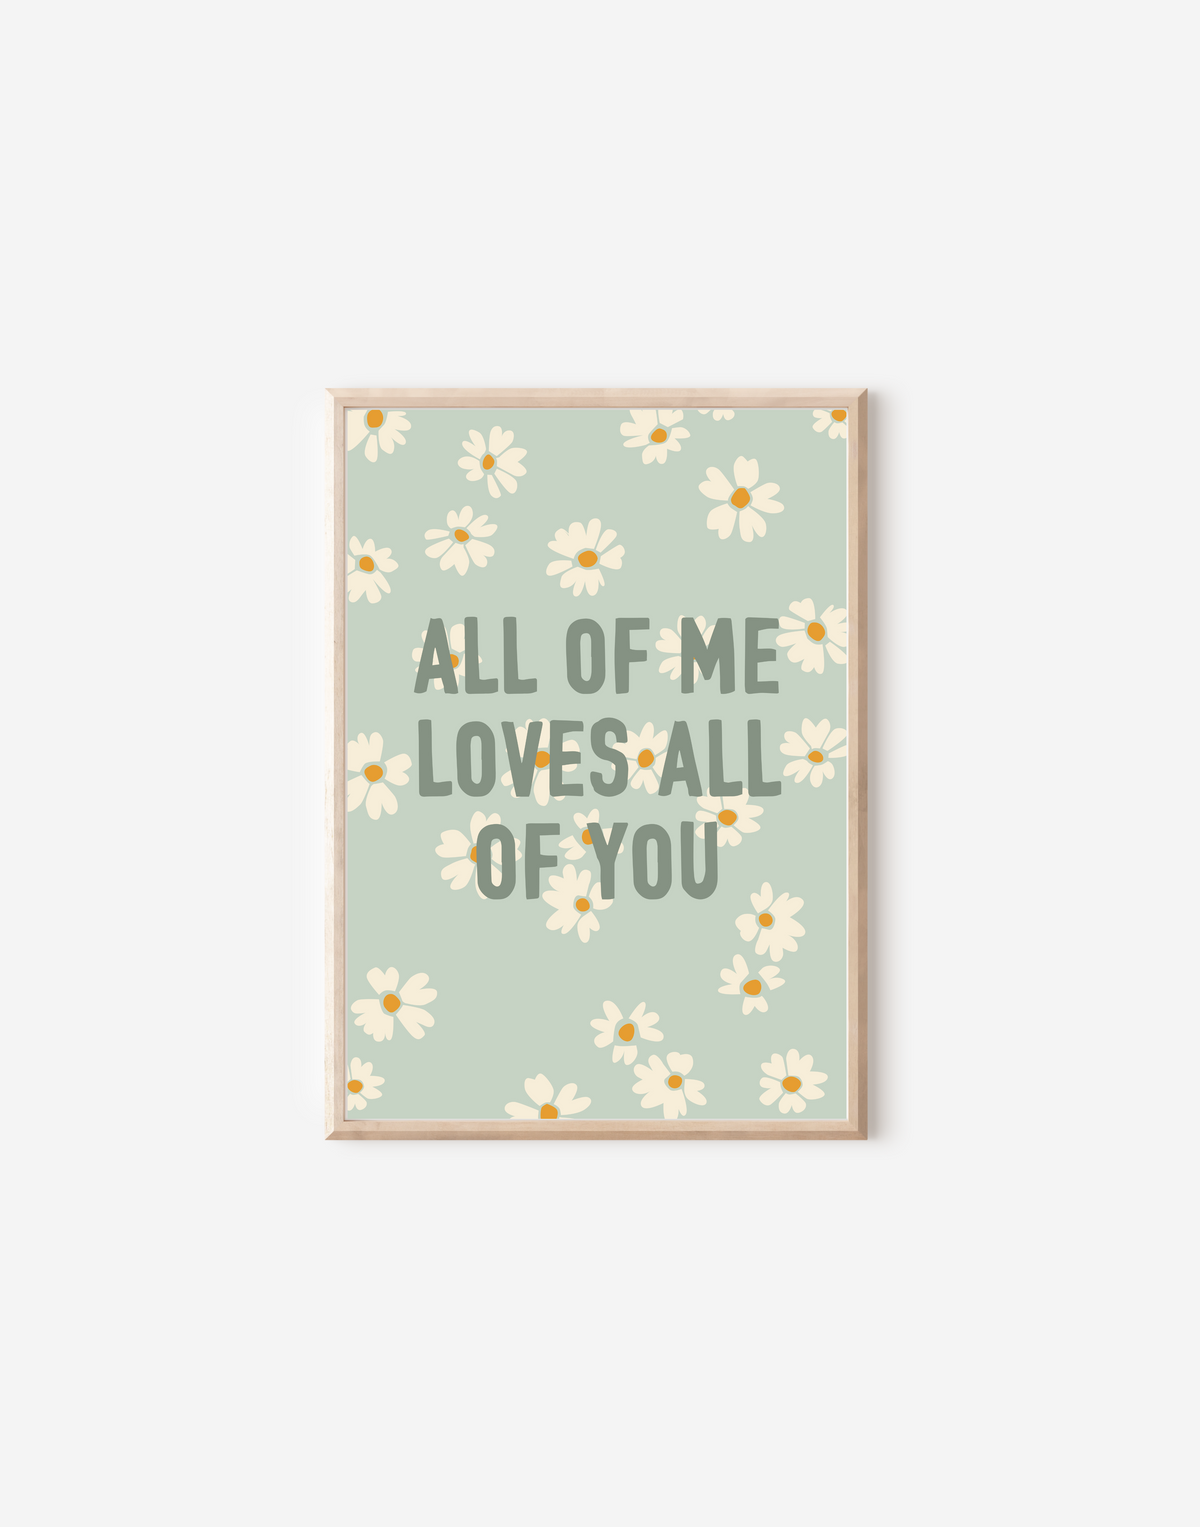 ALL OF ME LOVES ALL OF YOU - PRINT